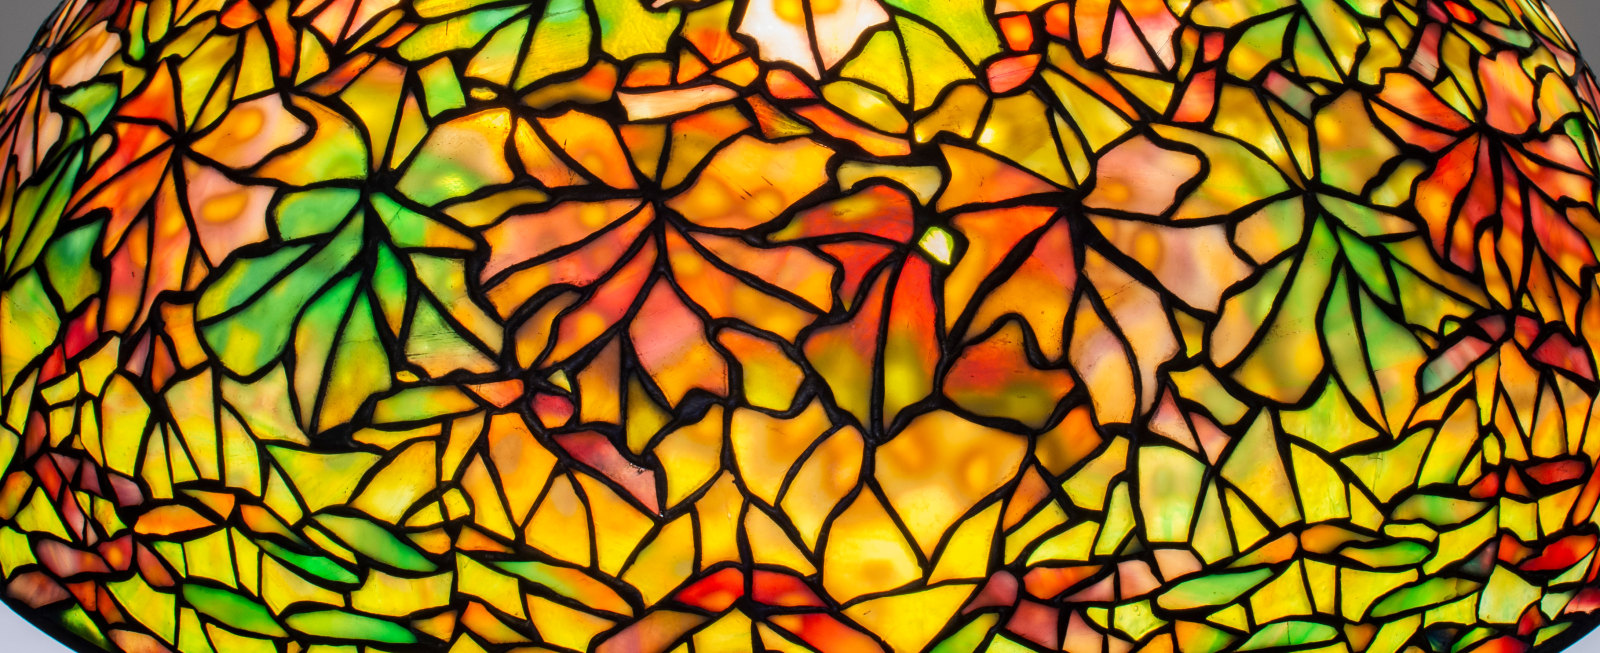 a detail shot of a leaded glass shade for an authentic tiffany lamp designed by clara driscoll for Tiffany Studios, depicting five-pointed oak leaves in leaded tiffany glass, each leaf formed by multiple pieces of hand-cut tiffany glass in various autumn foliage colors, each leaf in a different type and color of glass ranging from red, orange, and green